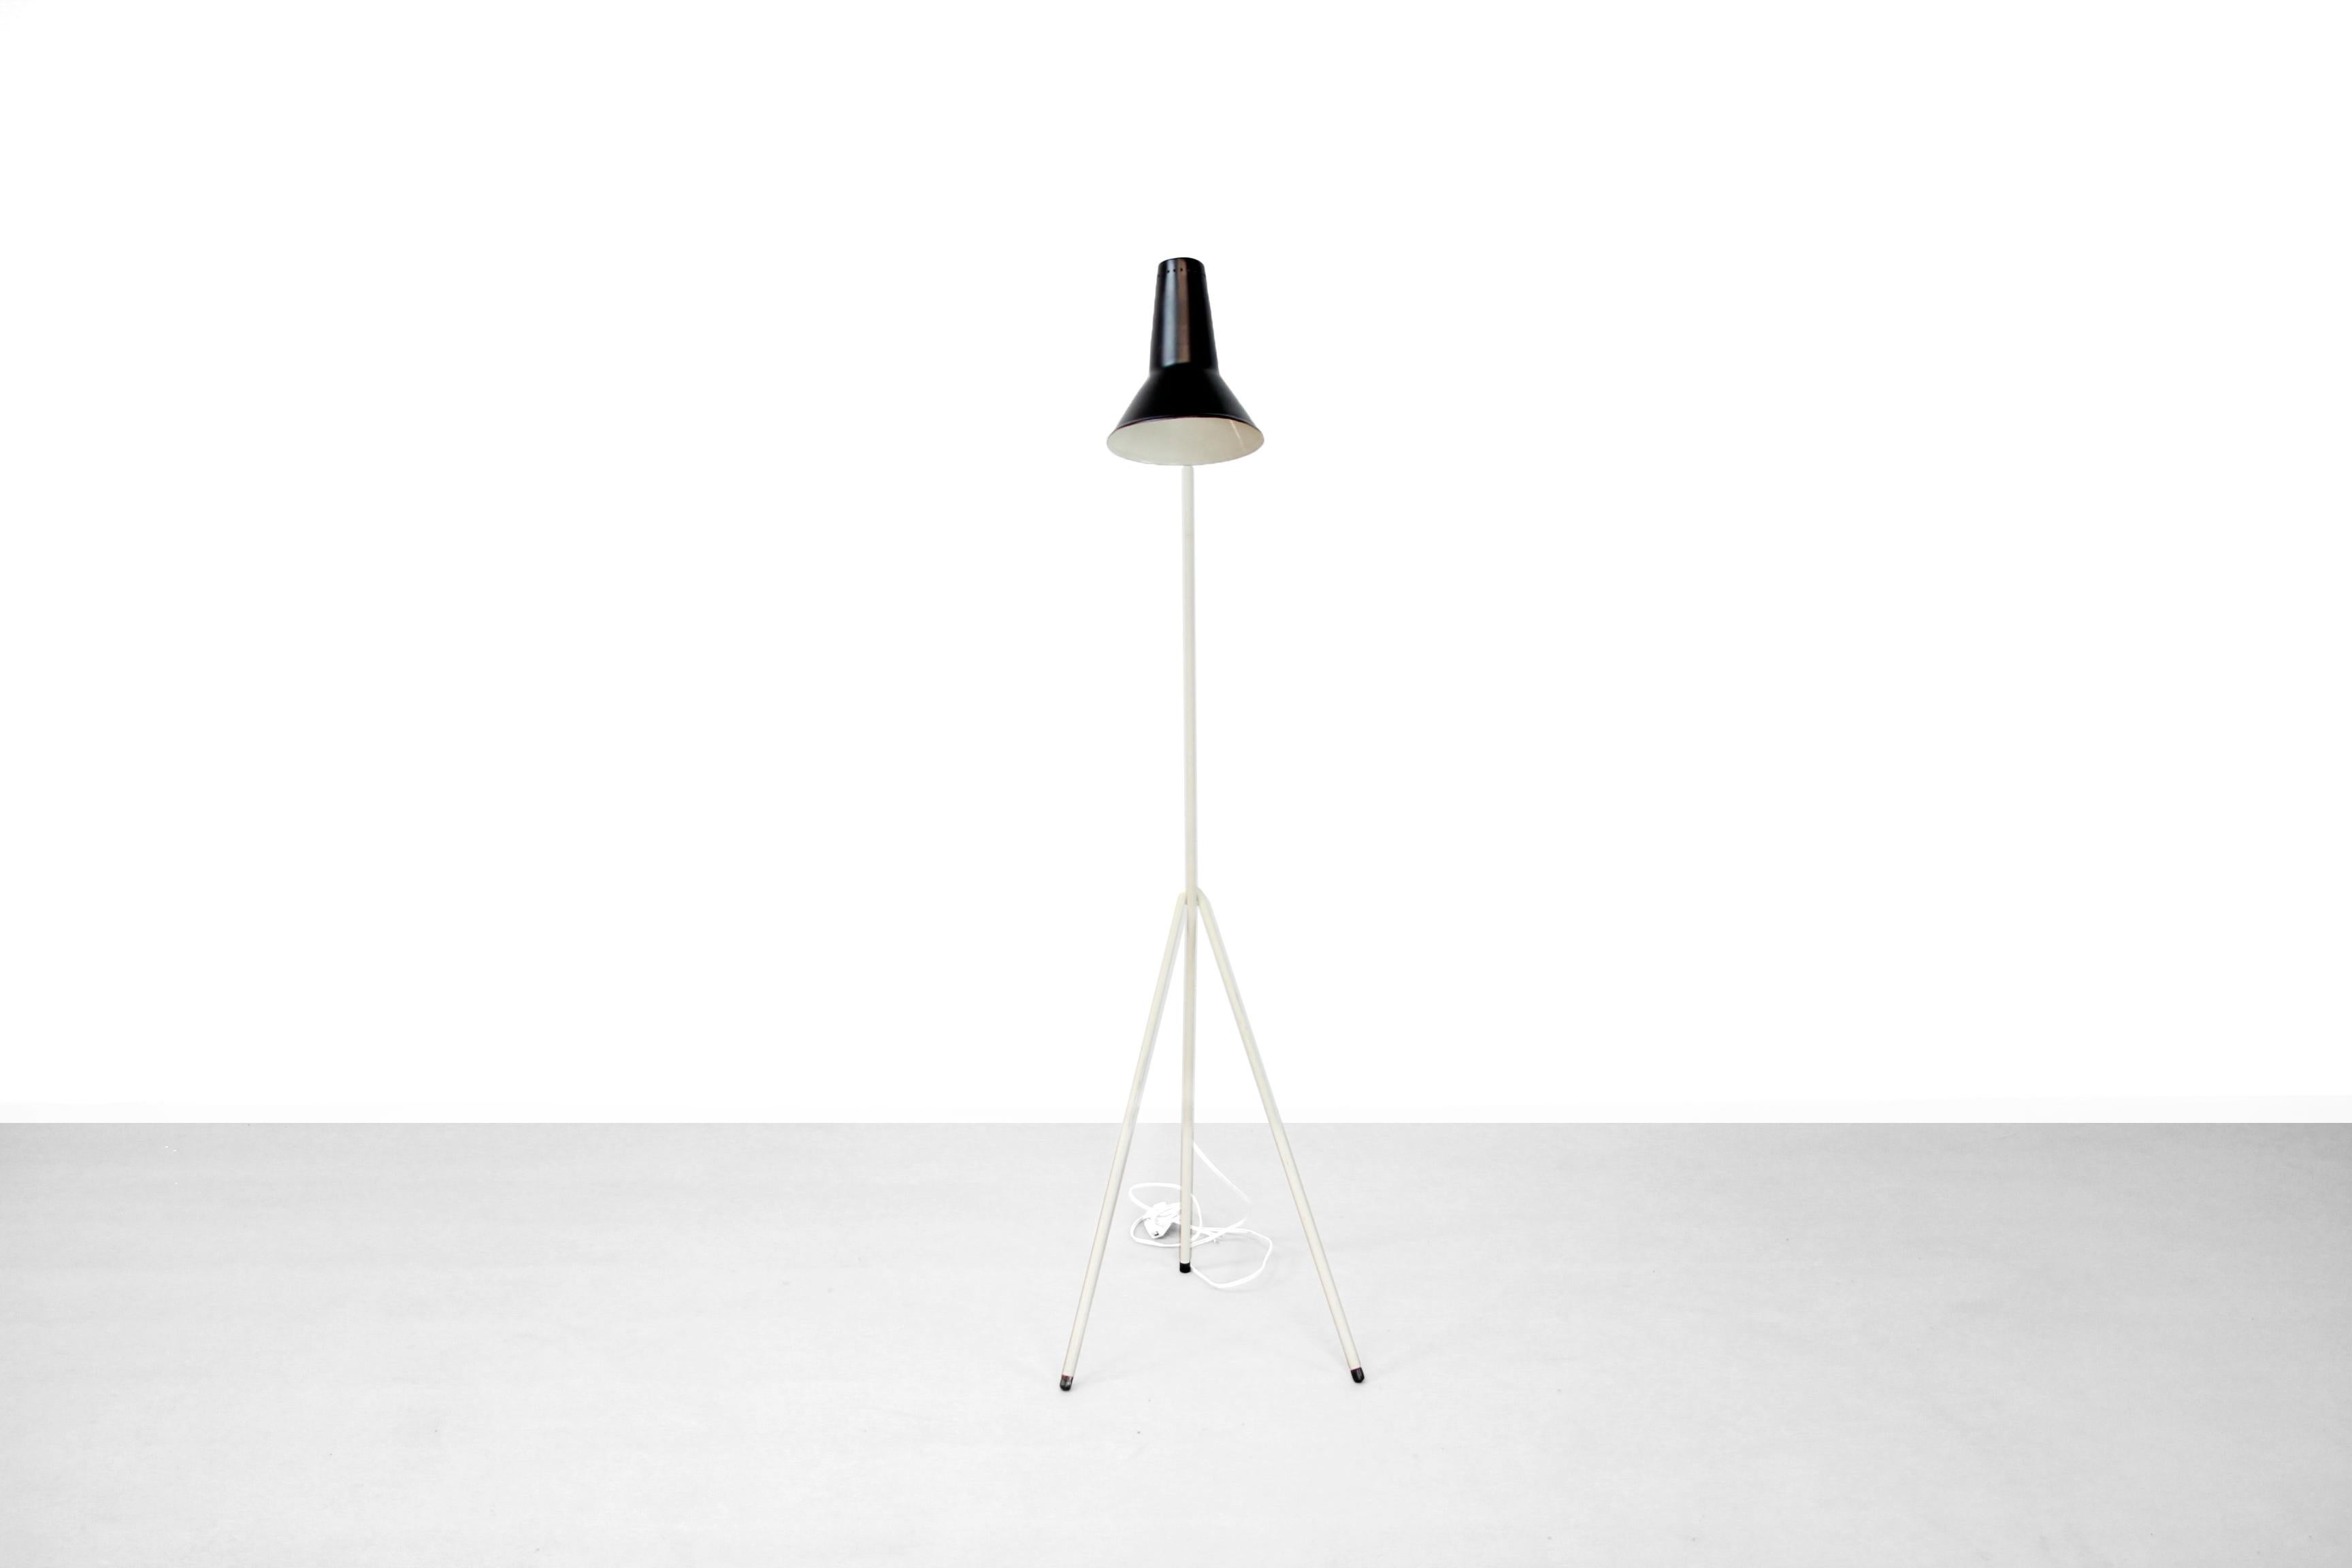 Hard to find Dutch Minimalist floor lamp designed by Willem Hagoort for Hagoort Lighting, in the 1950s The Netherlands. This model is called model 333. Characteristic of his 